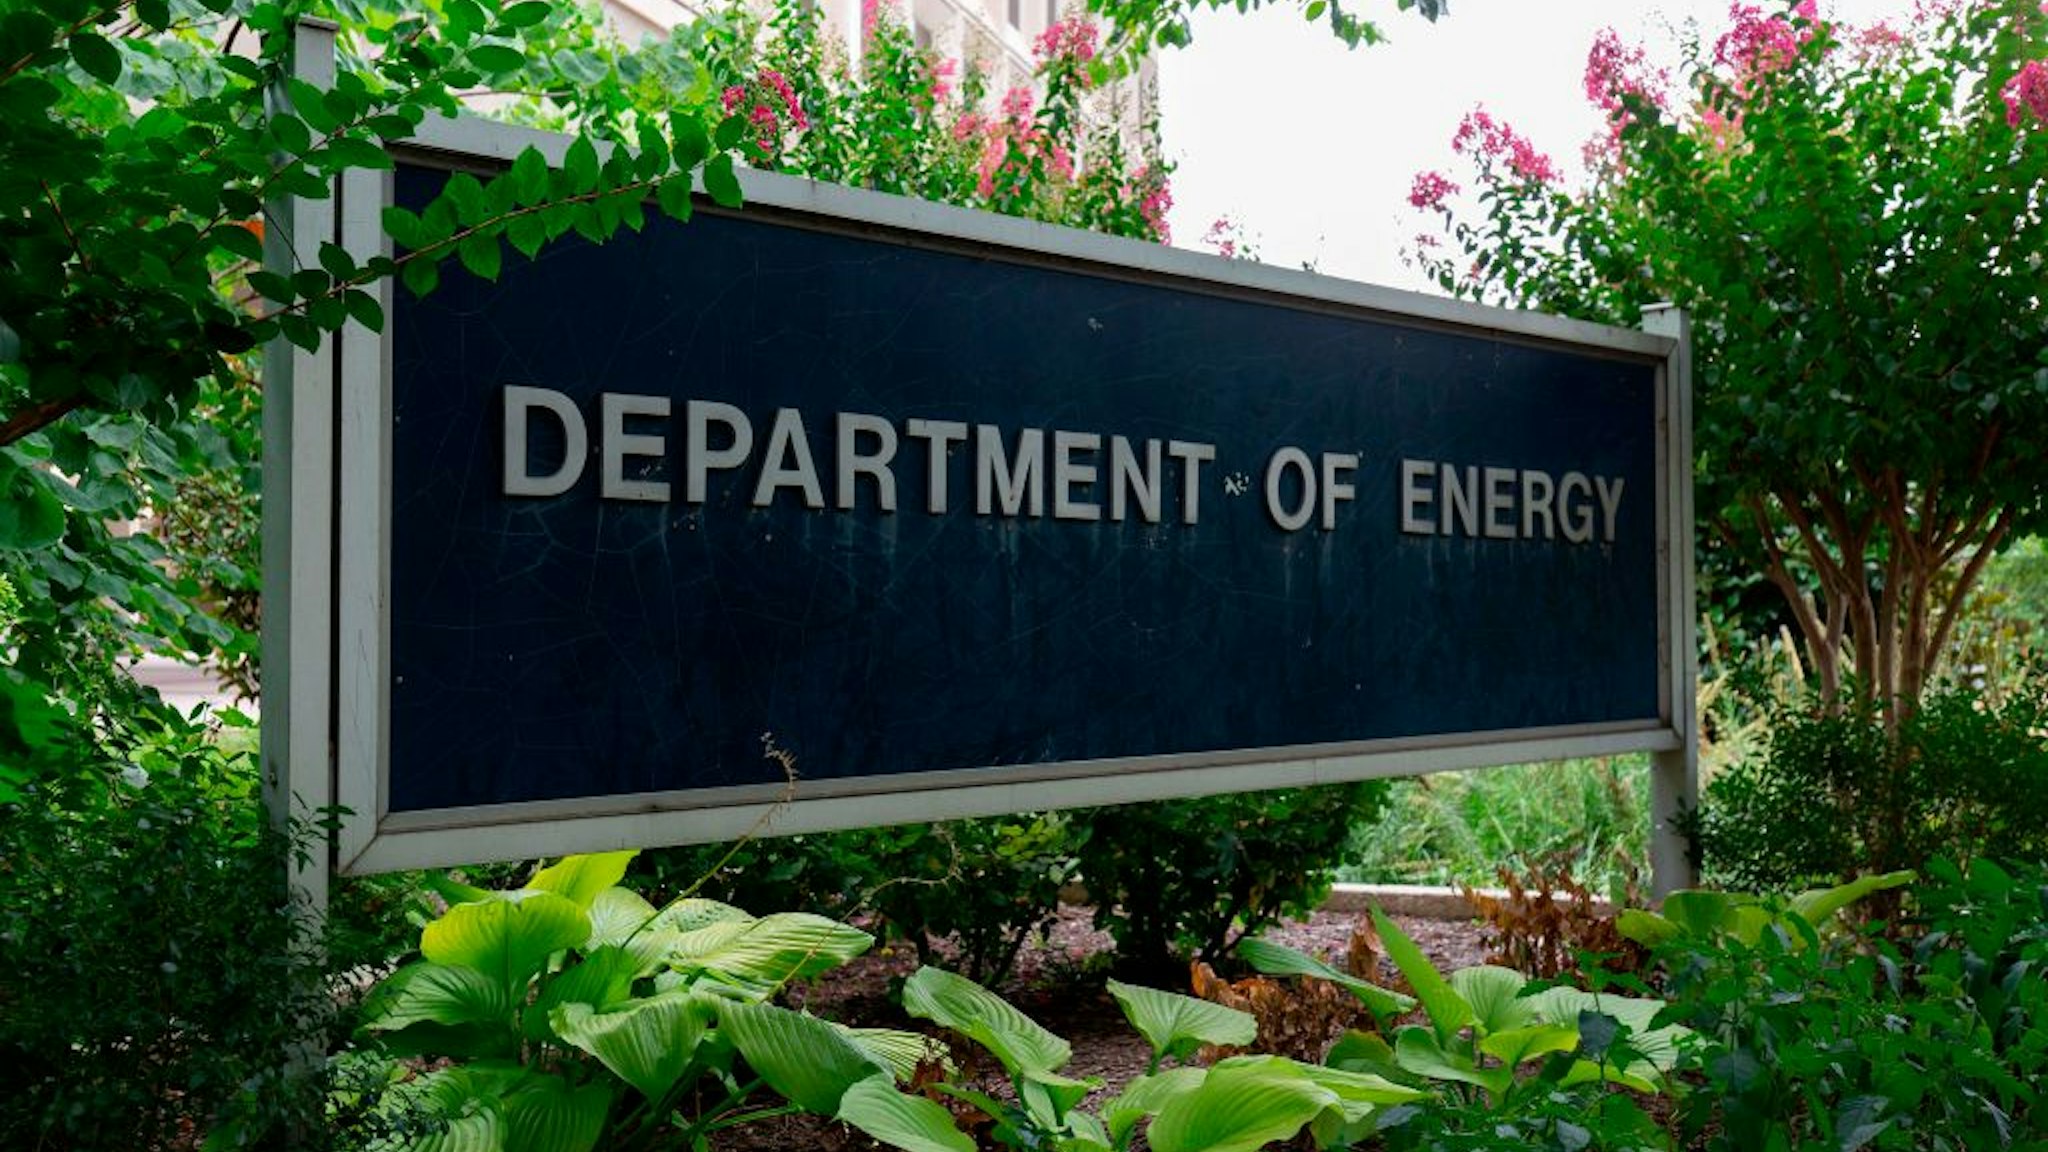 The US Department of Energy building is seen in Washington, DC, on July 22, 2019.